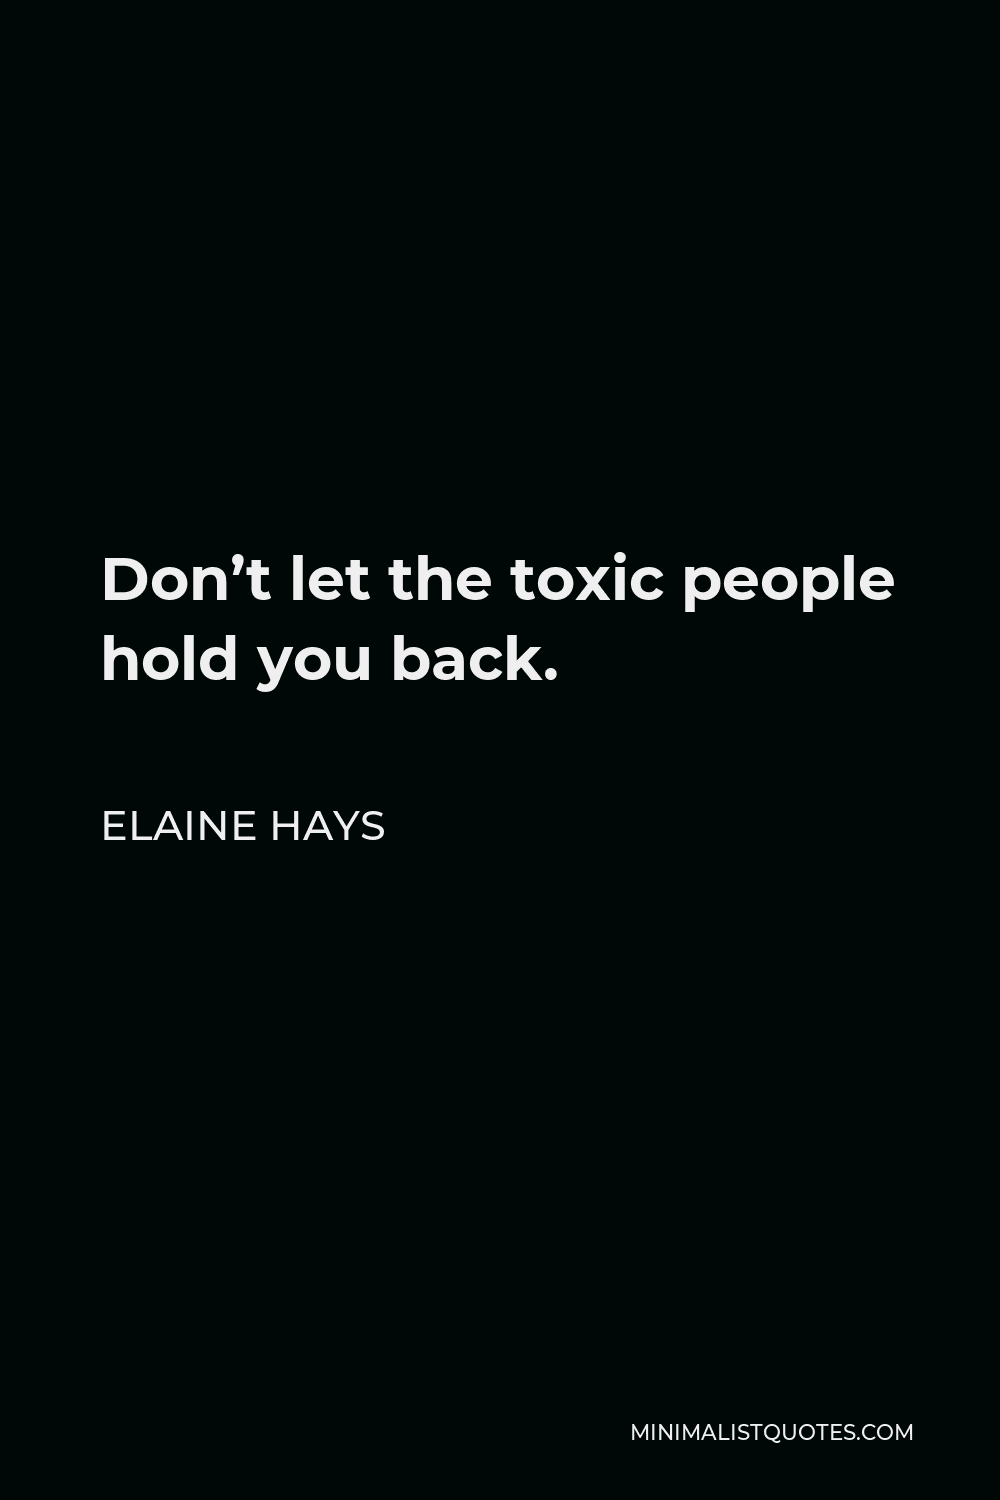 Elaine Hays Quote - Don’t let the toxic people hold you back.